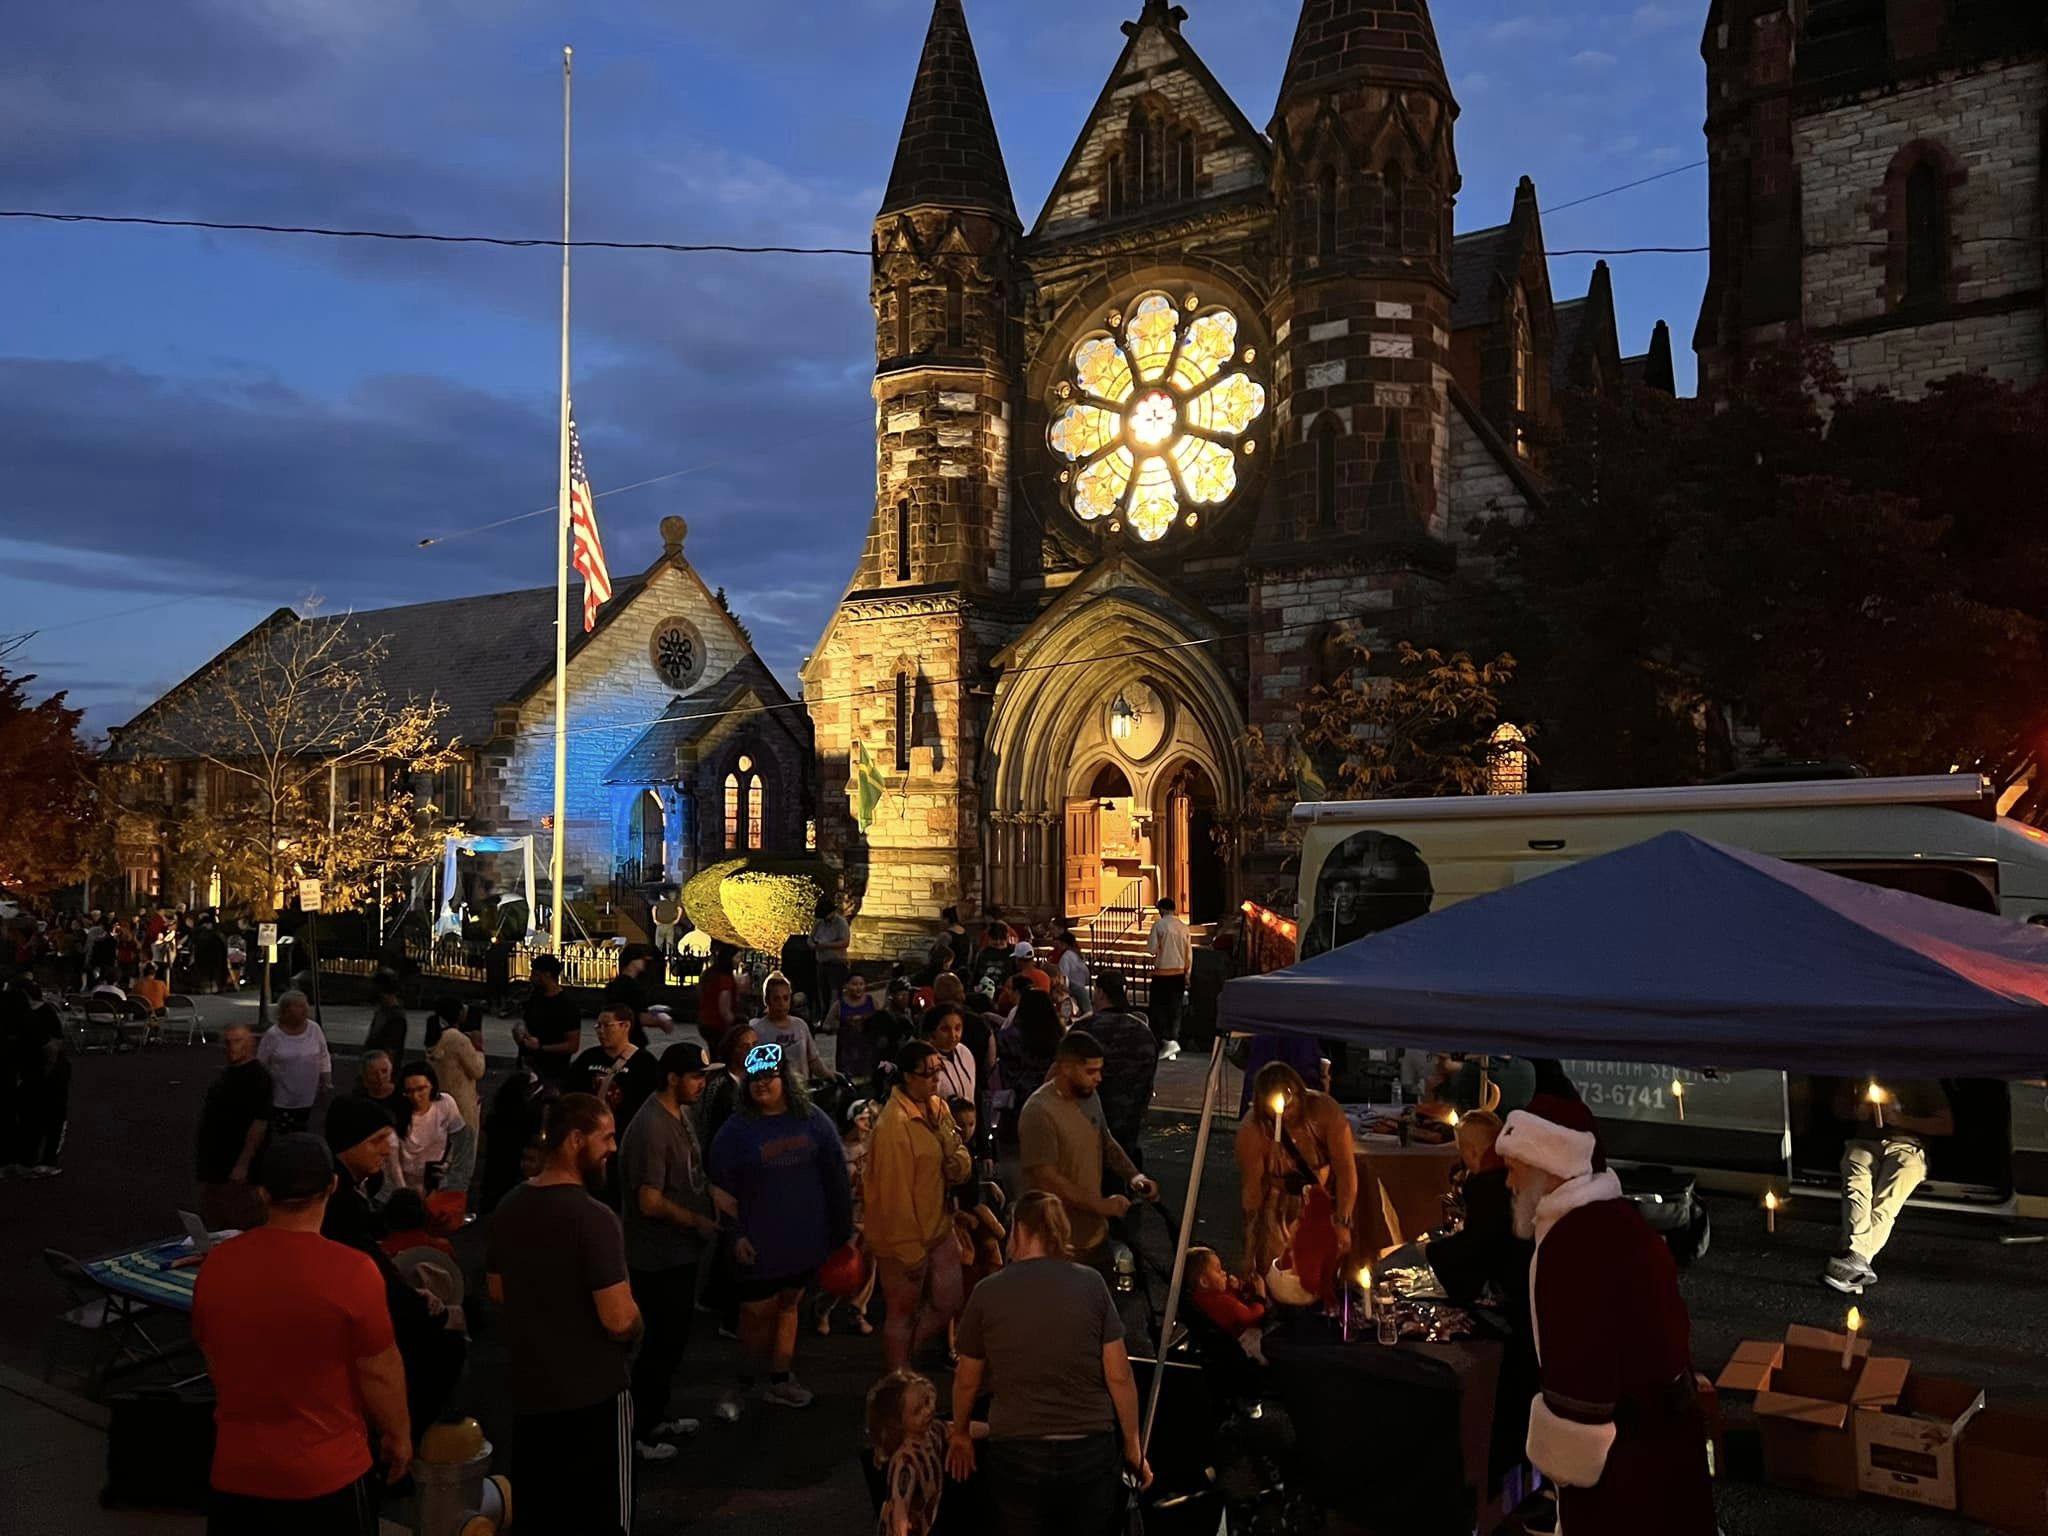 exterior of a church at night with a crowd in the foreground